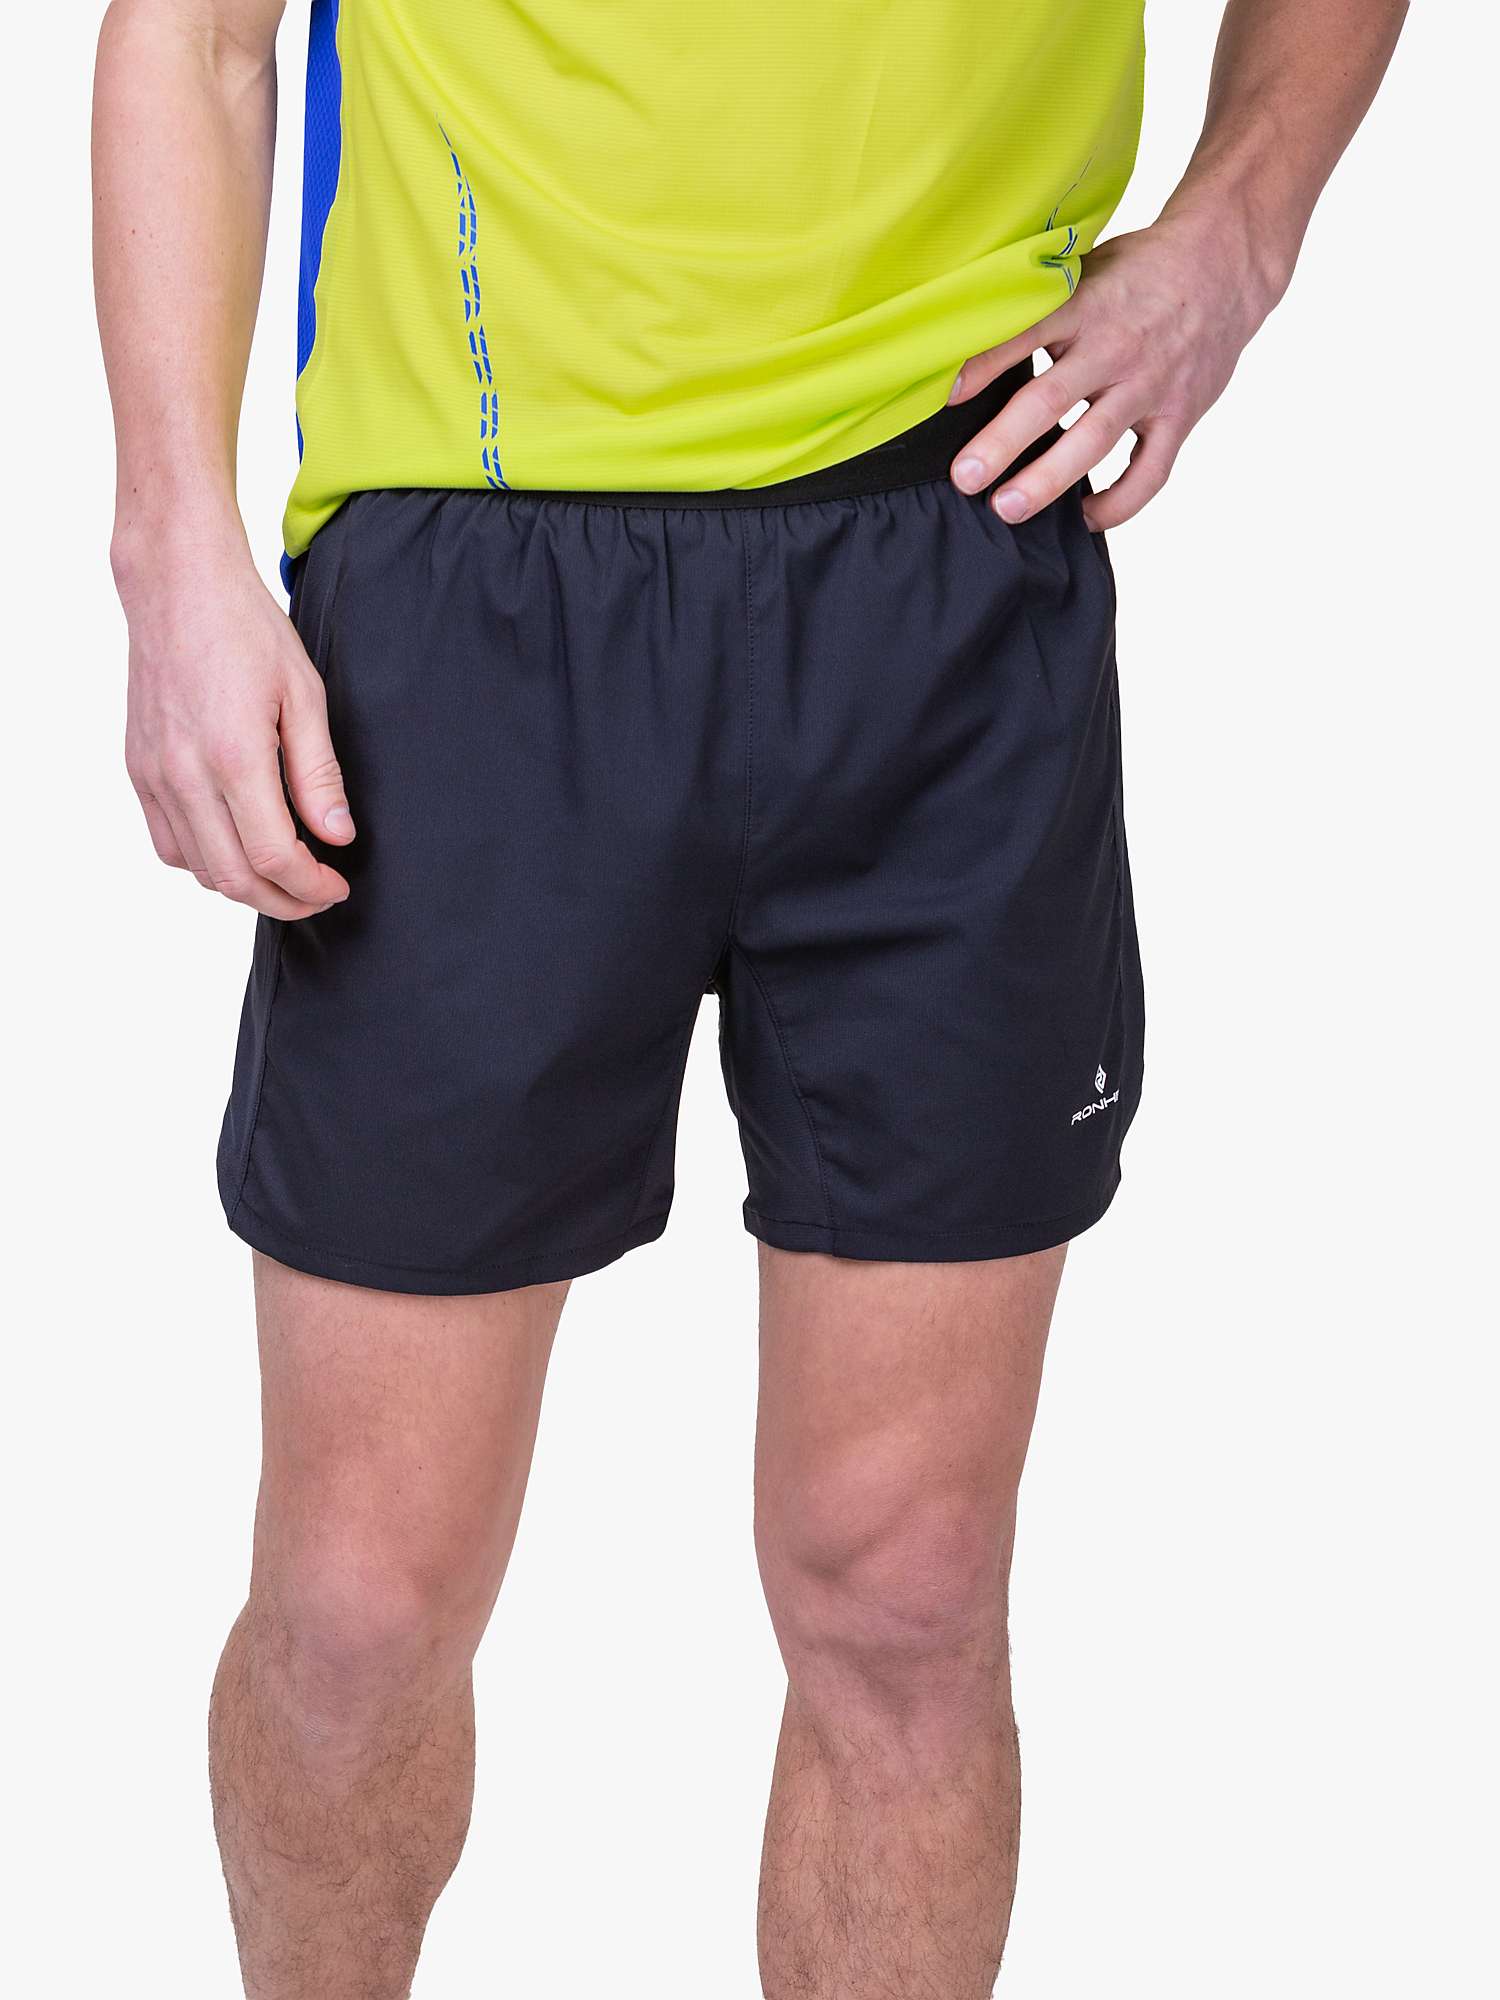 Buy Ronhill Twin Shorts, Black Online at johnlewis.com